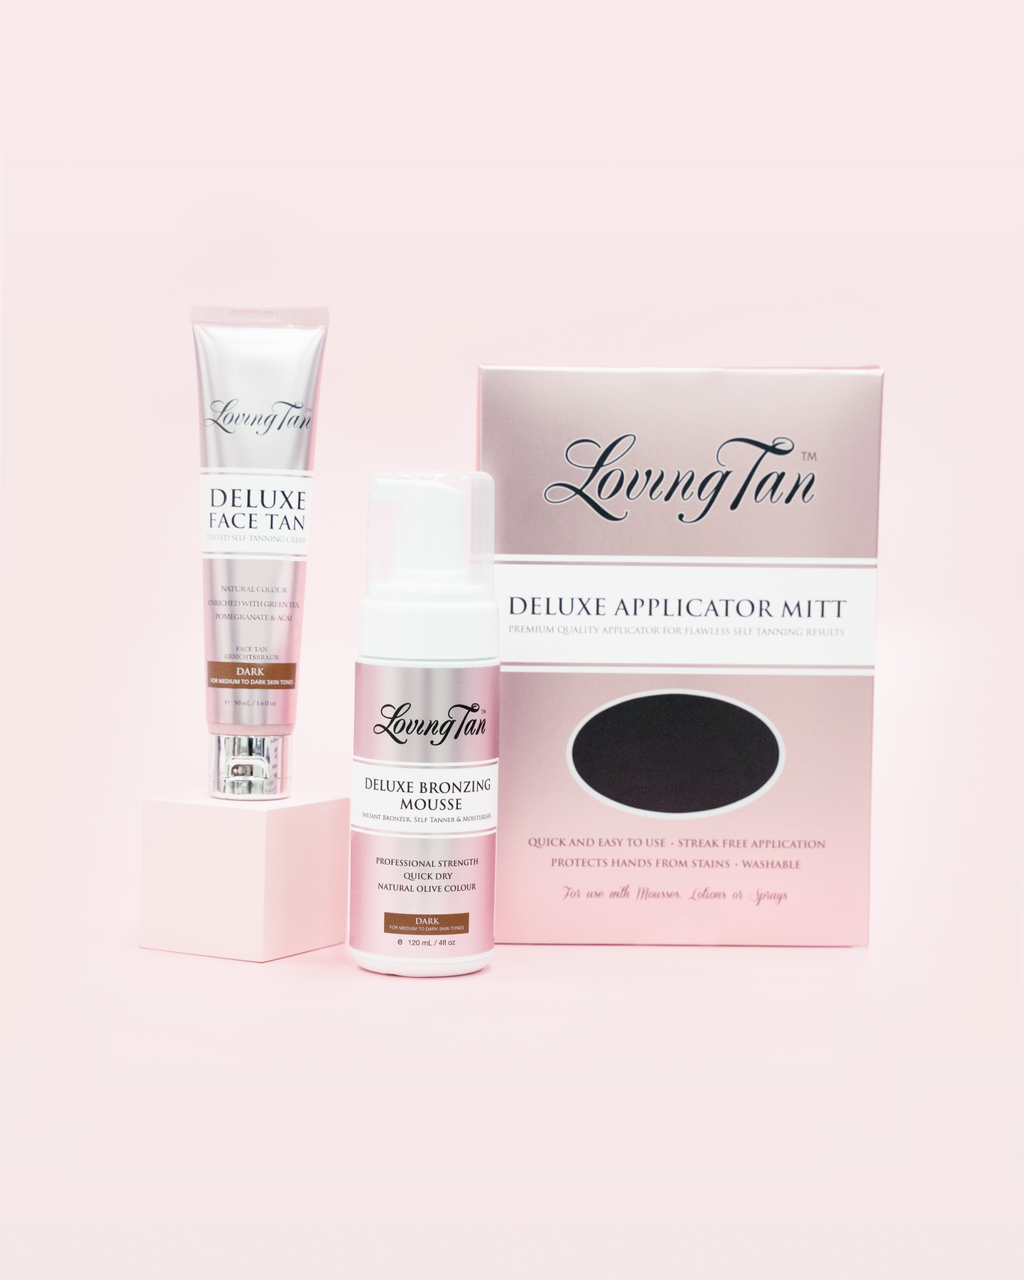 Achieve a Natural and Dark Tan with Loving Tan Deluxe Bronzing Mousse